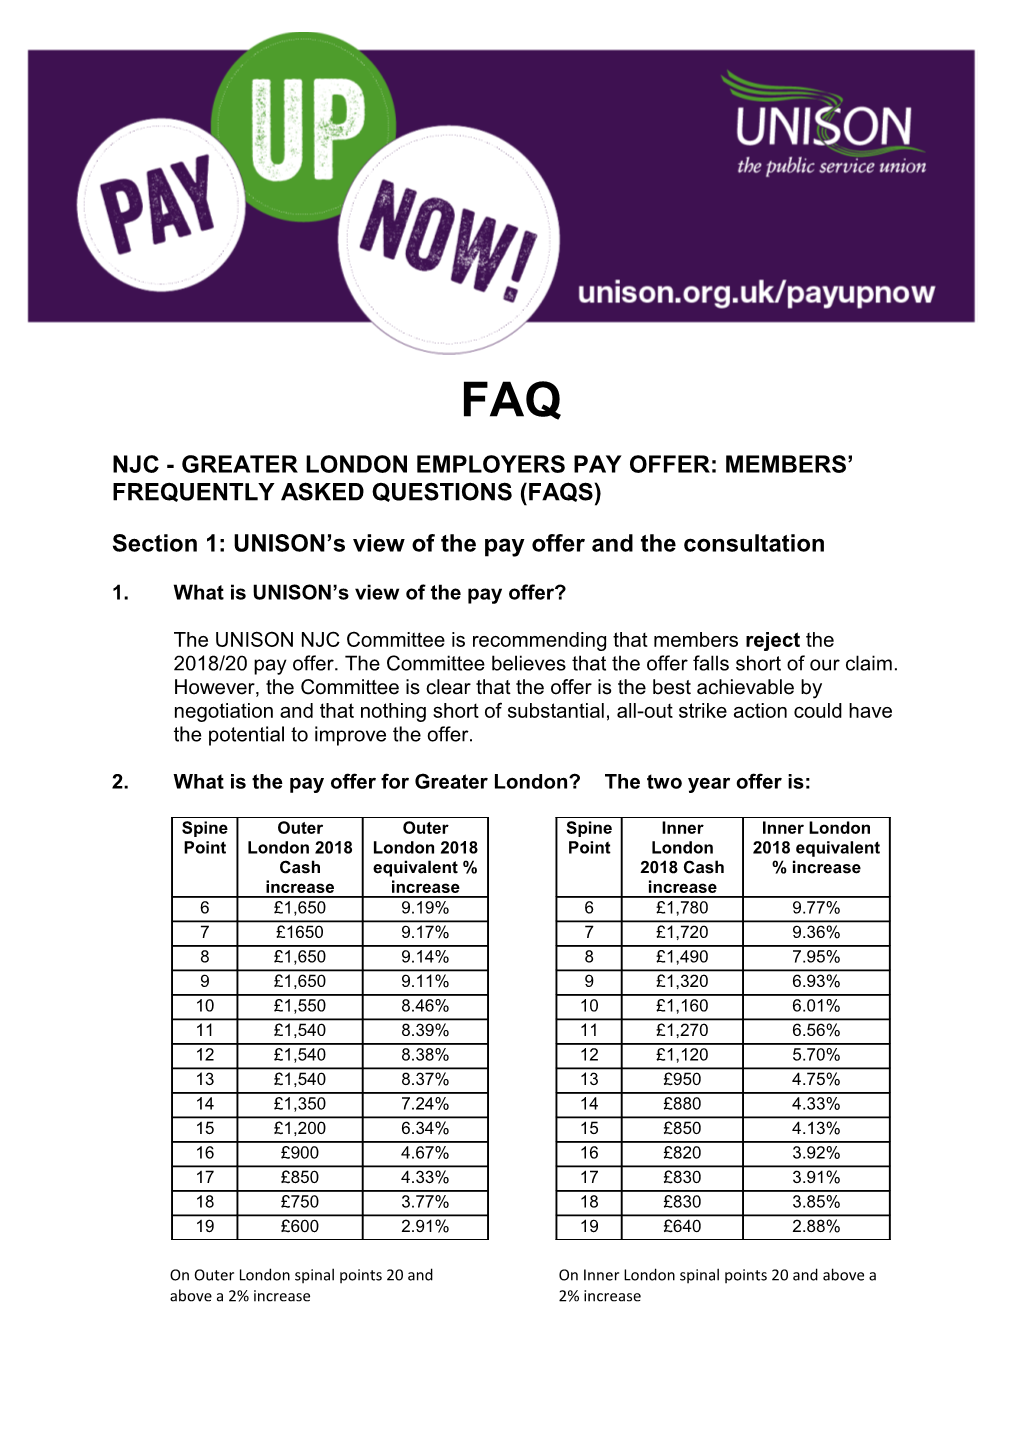 Njc - Greater London Employers Pay Offer: Members Frequently Asked Questions (Faqs)